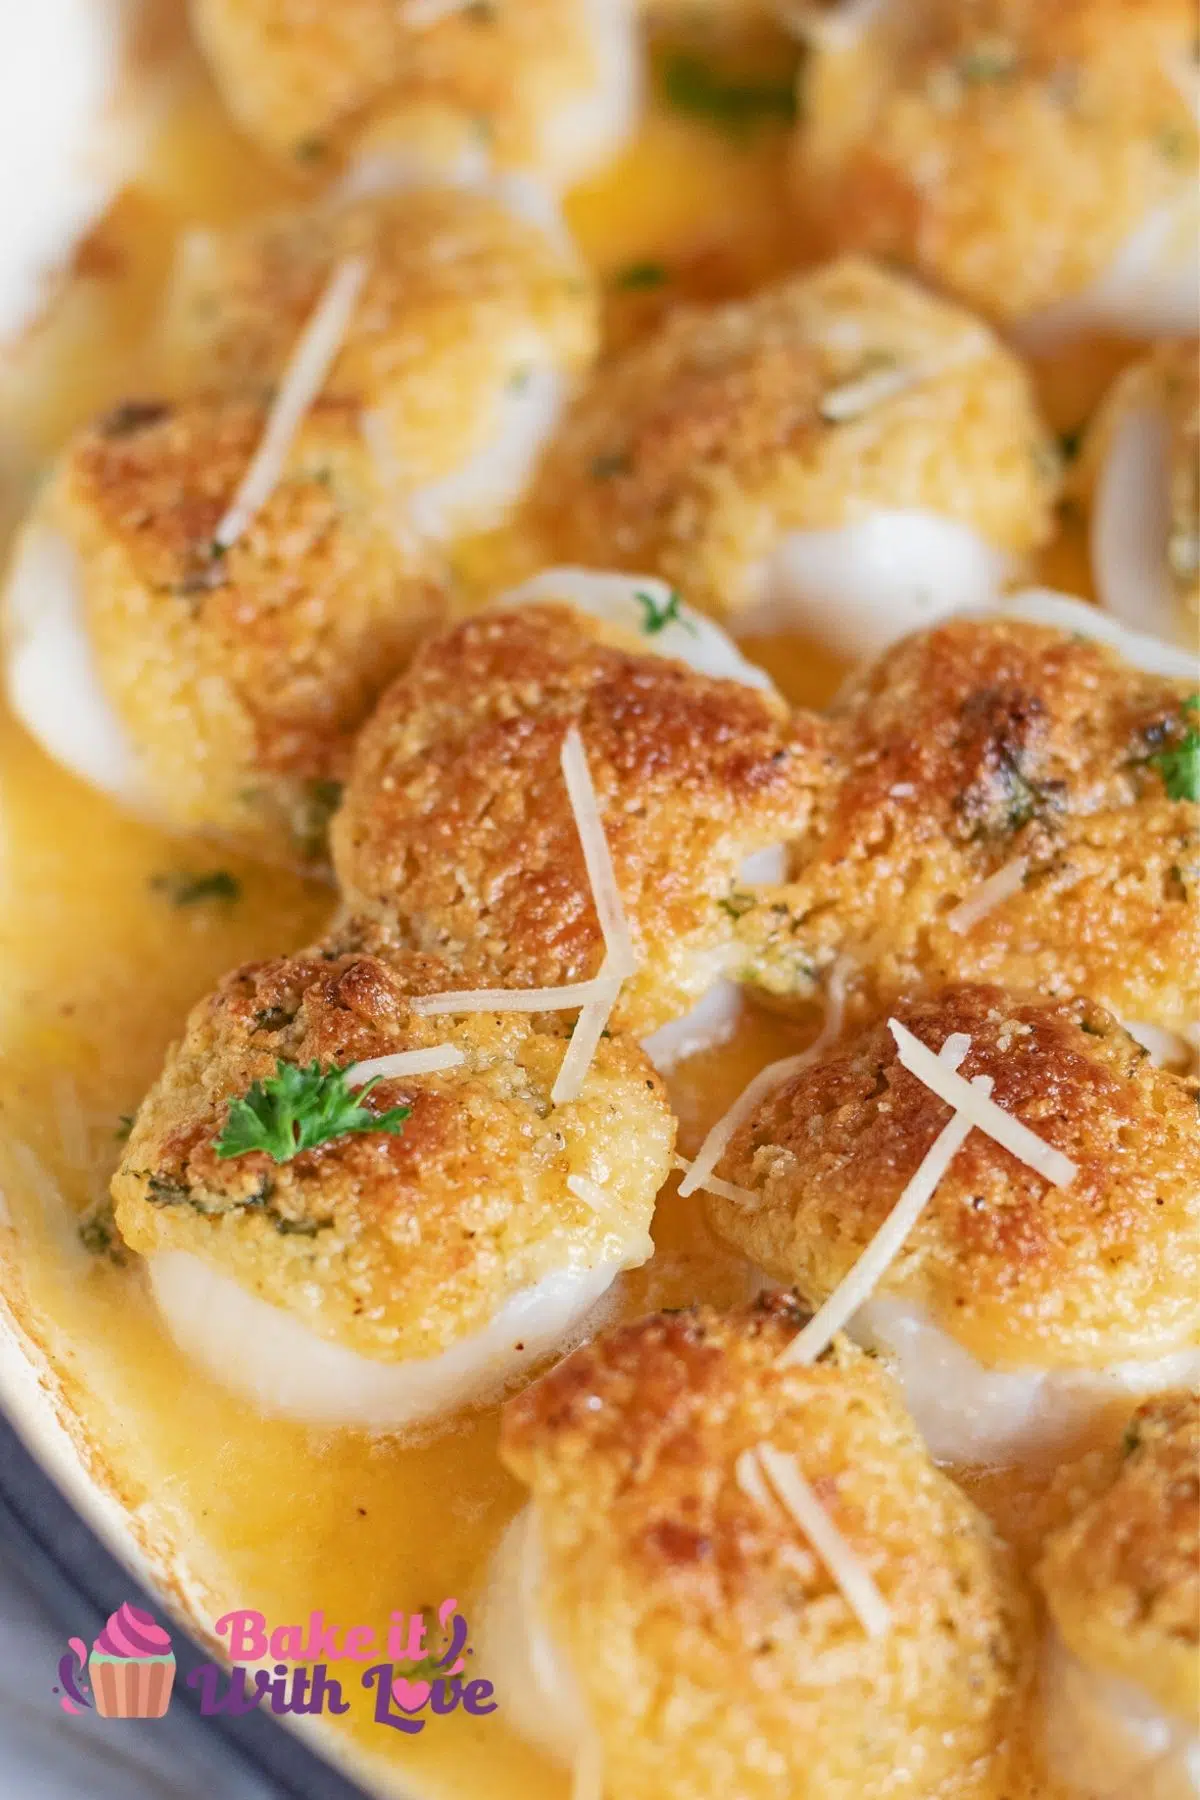 Tasty baked scallops with breadcrumb and Parmesan topping ready to serve.